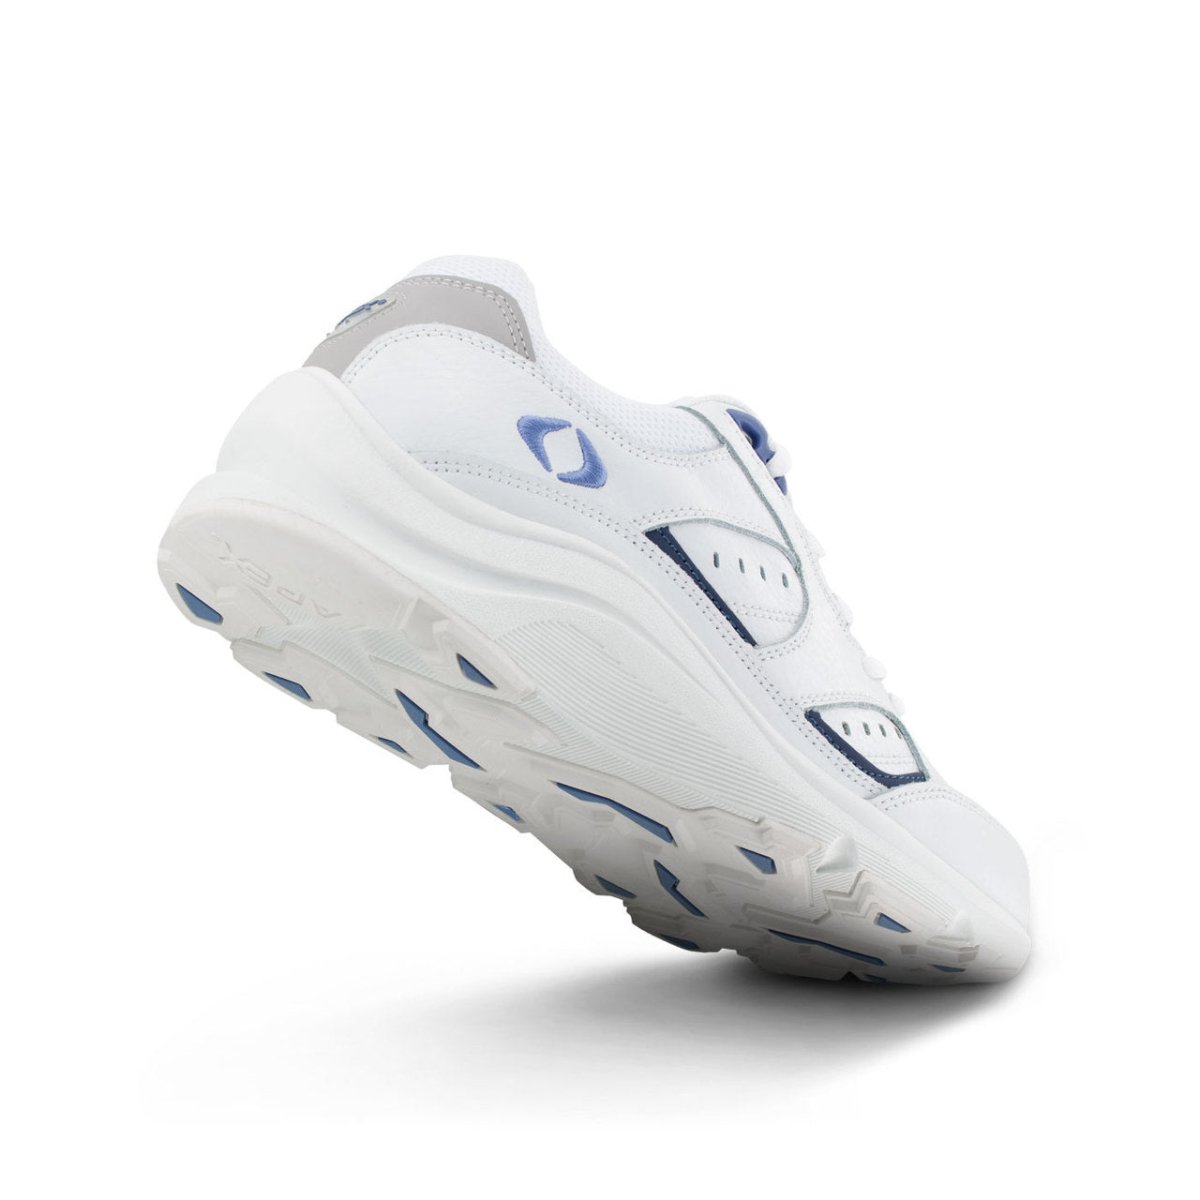 APEX V854 WALKER WOMEN'S SHOES IN WHITE/PERI - TLW Shoes